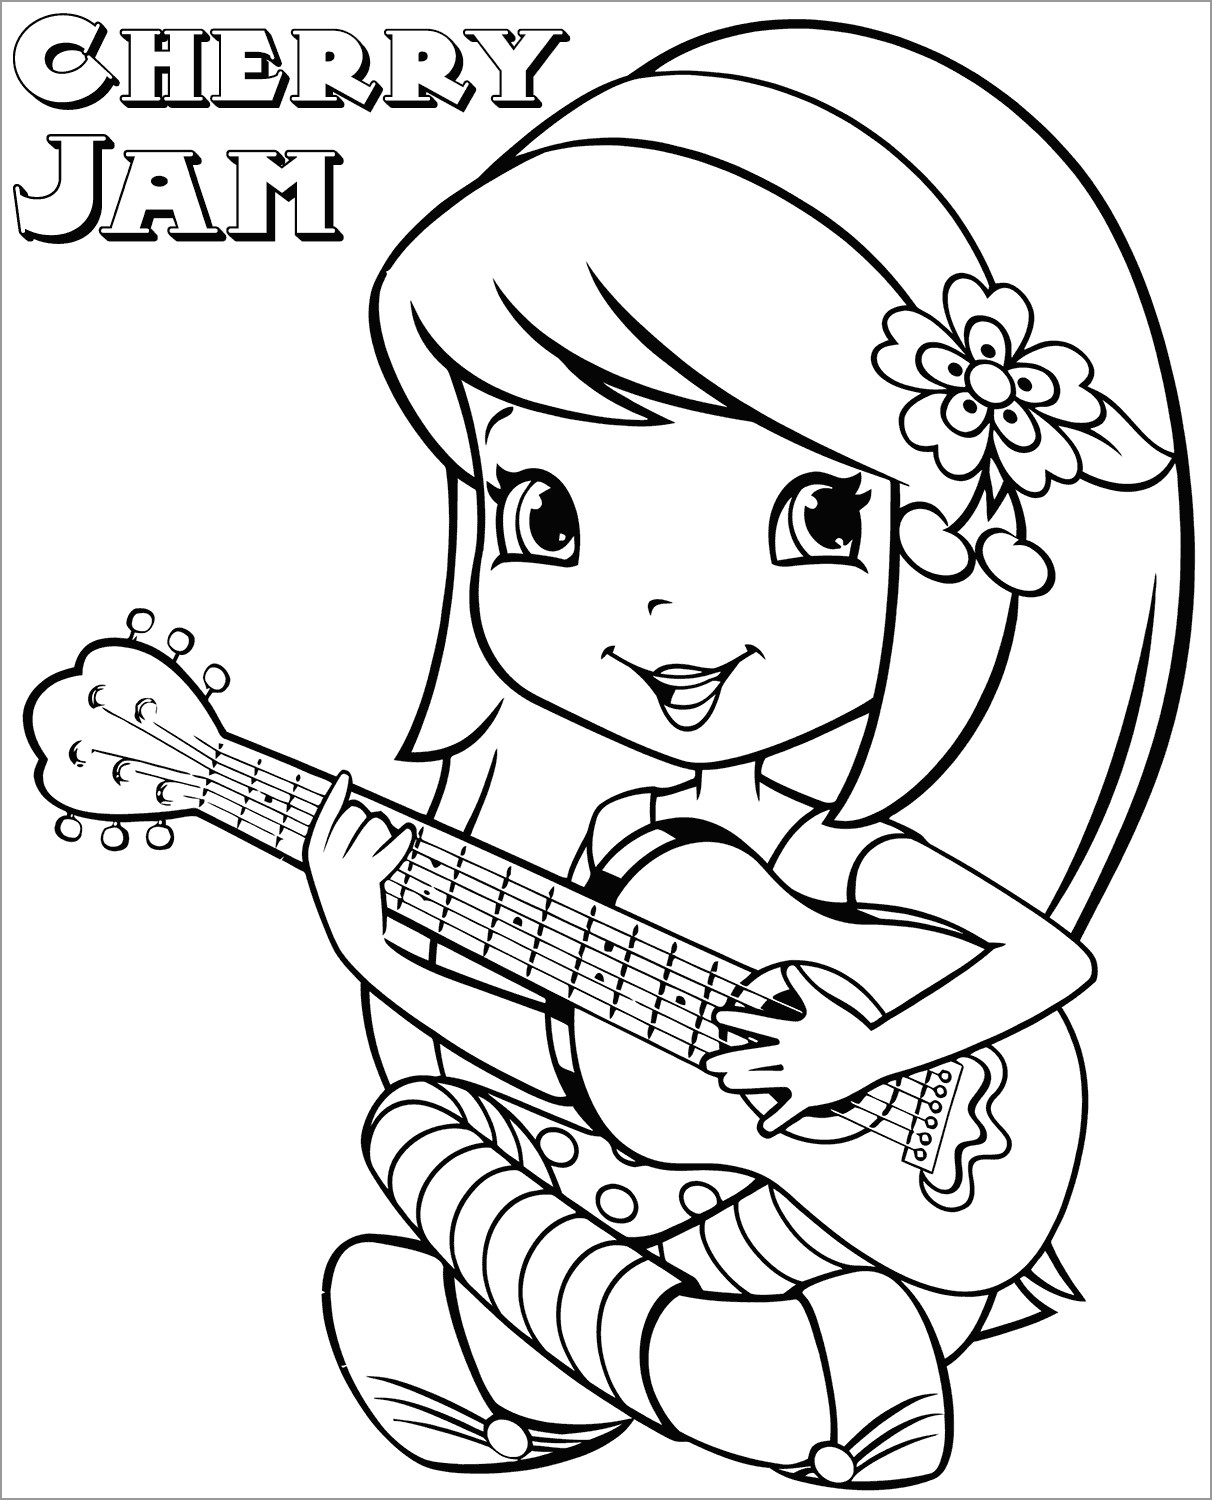 Strawberry Shortcake Cherry Jam Playing Guitar Coloring Page